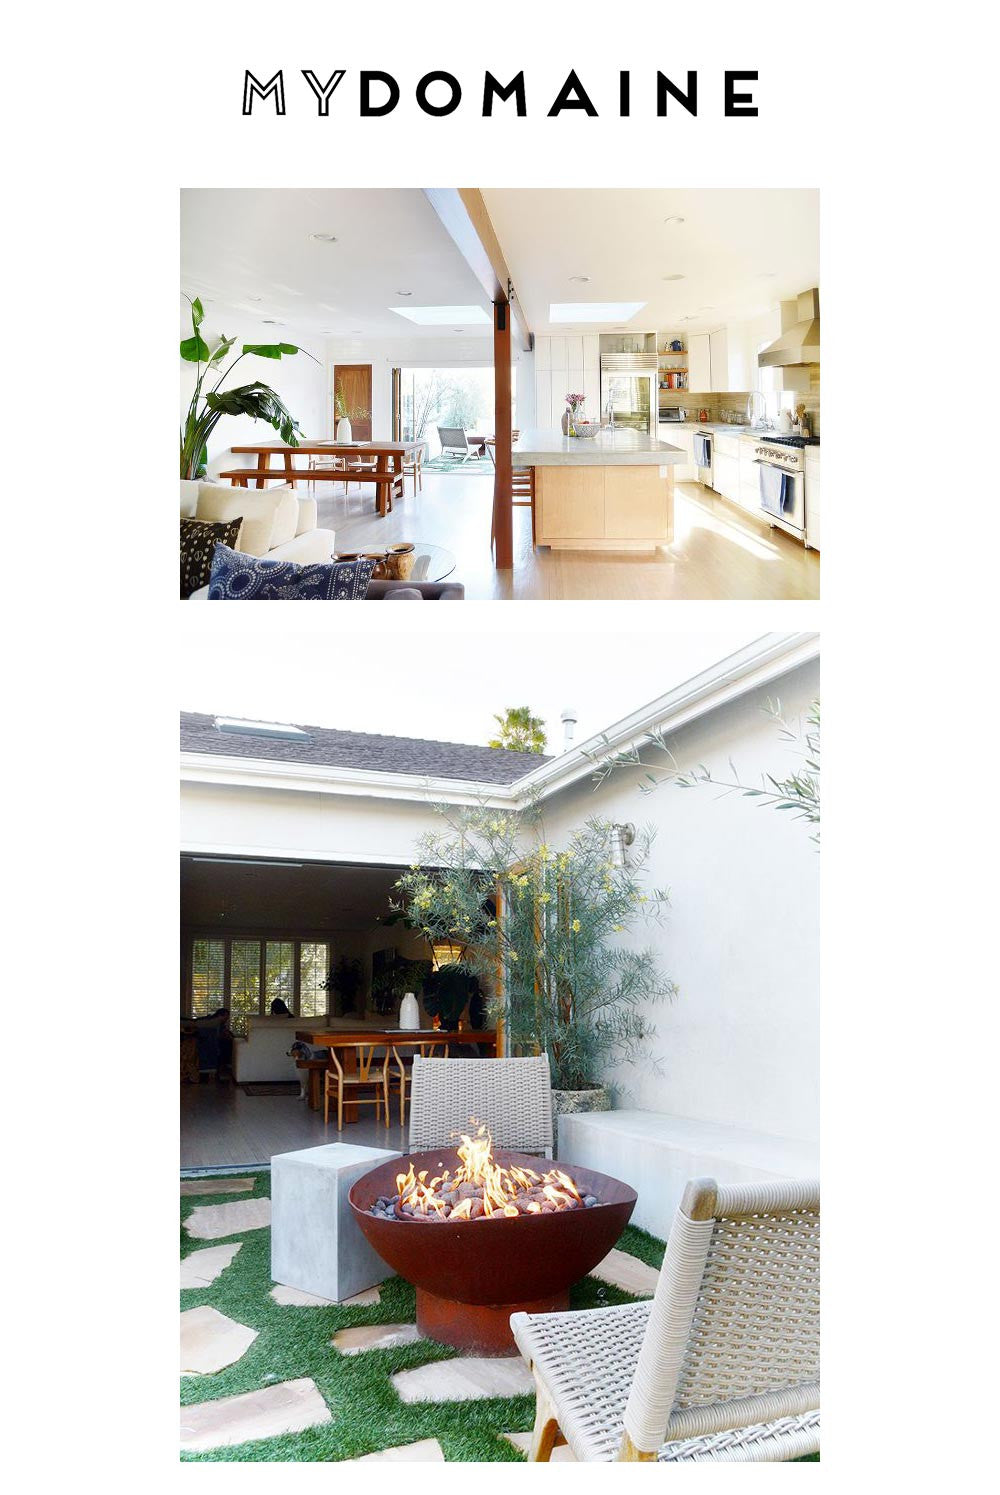 THE HOME OF MONROW’S CO-FOUNDER, MICHELLE WENKE, FEATURED ON MYDOMAINE